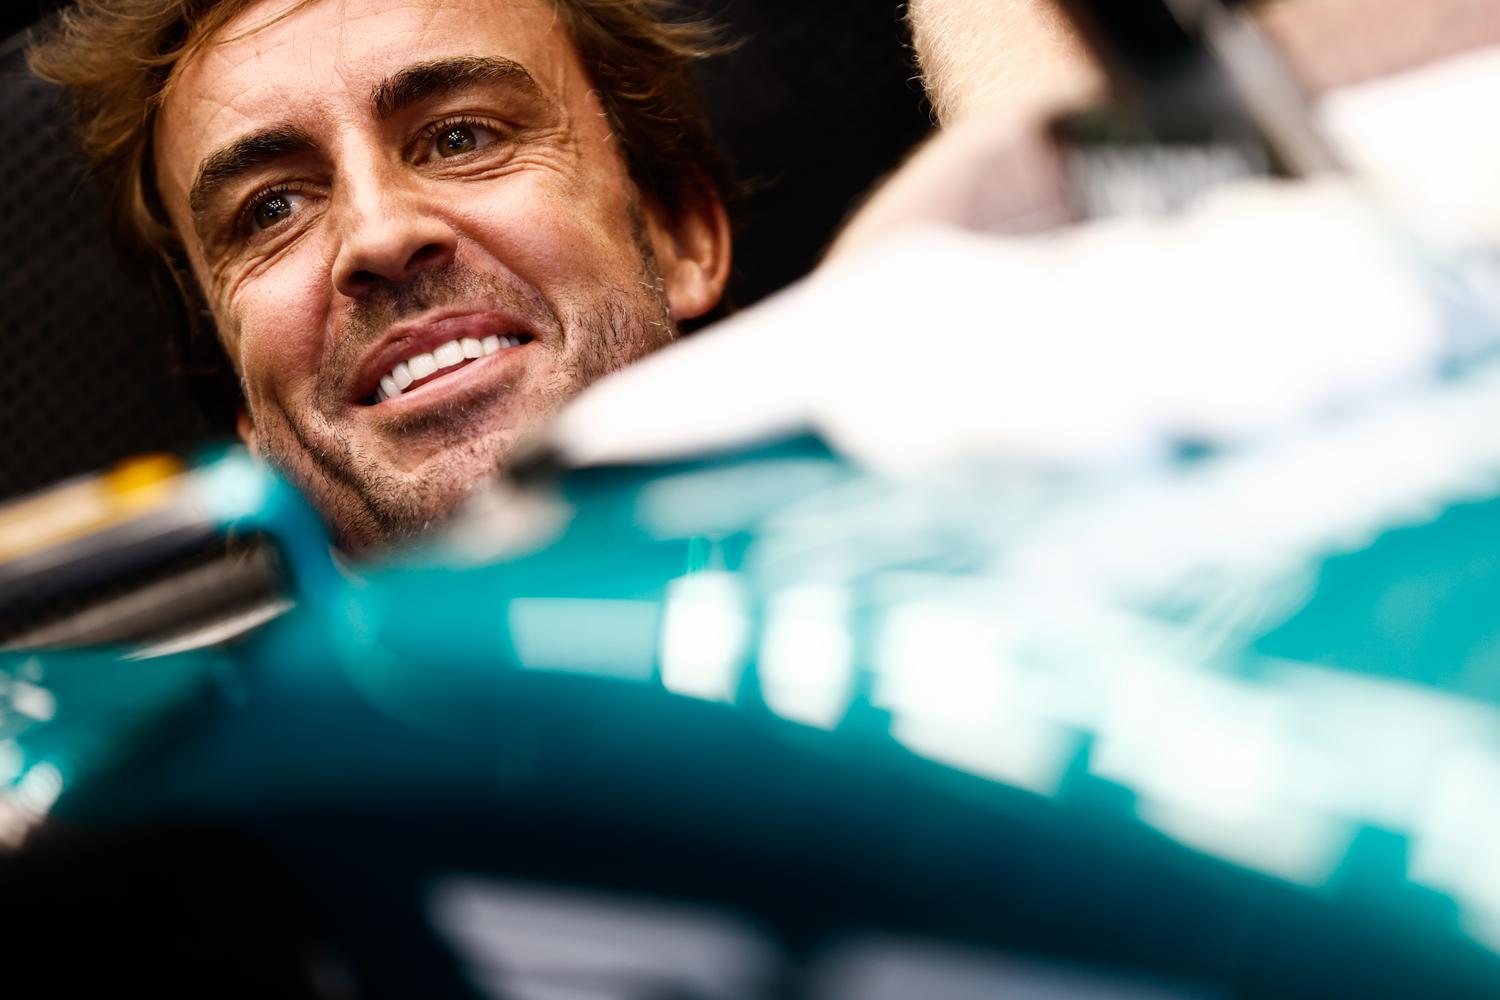 Fernando Alonso compares Aston Martin’s position in F1 to competing in the ‘Champion’s League’